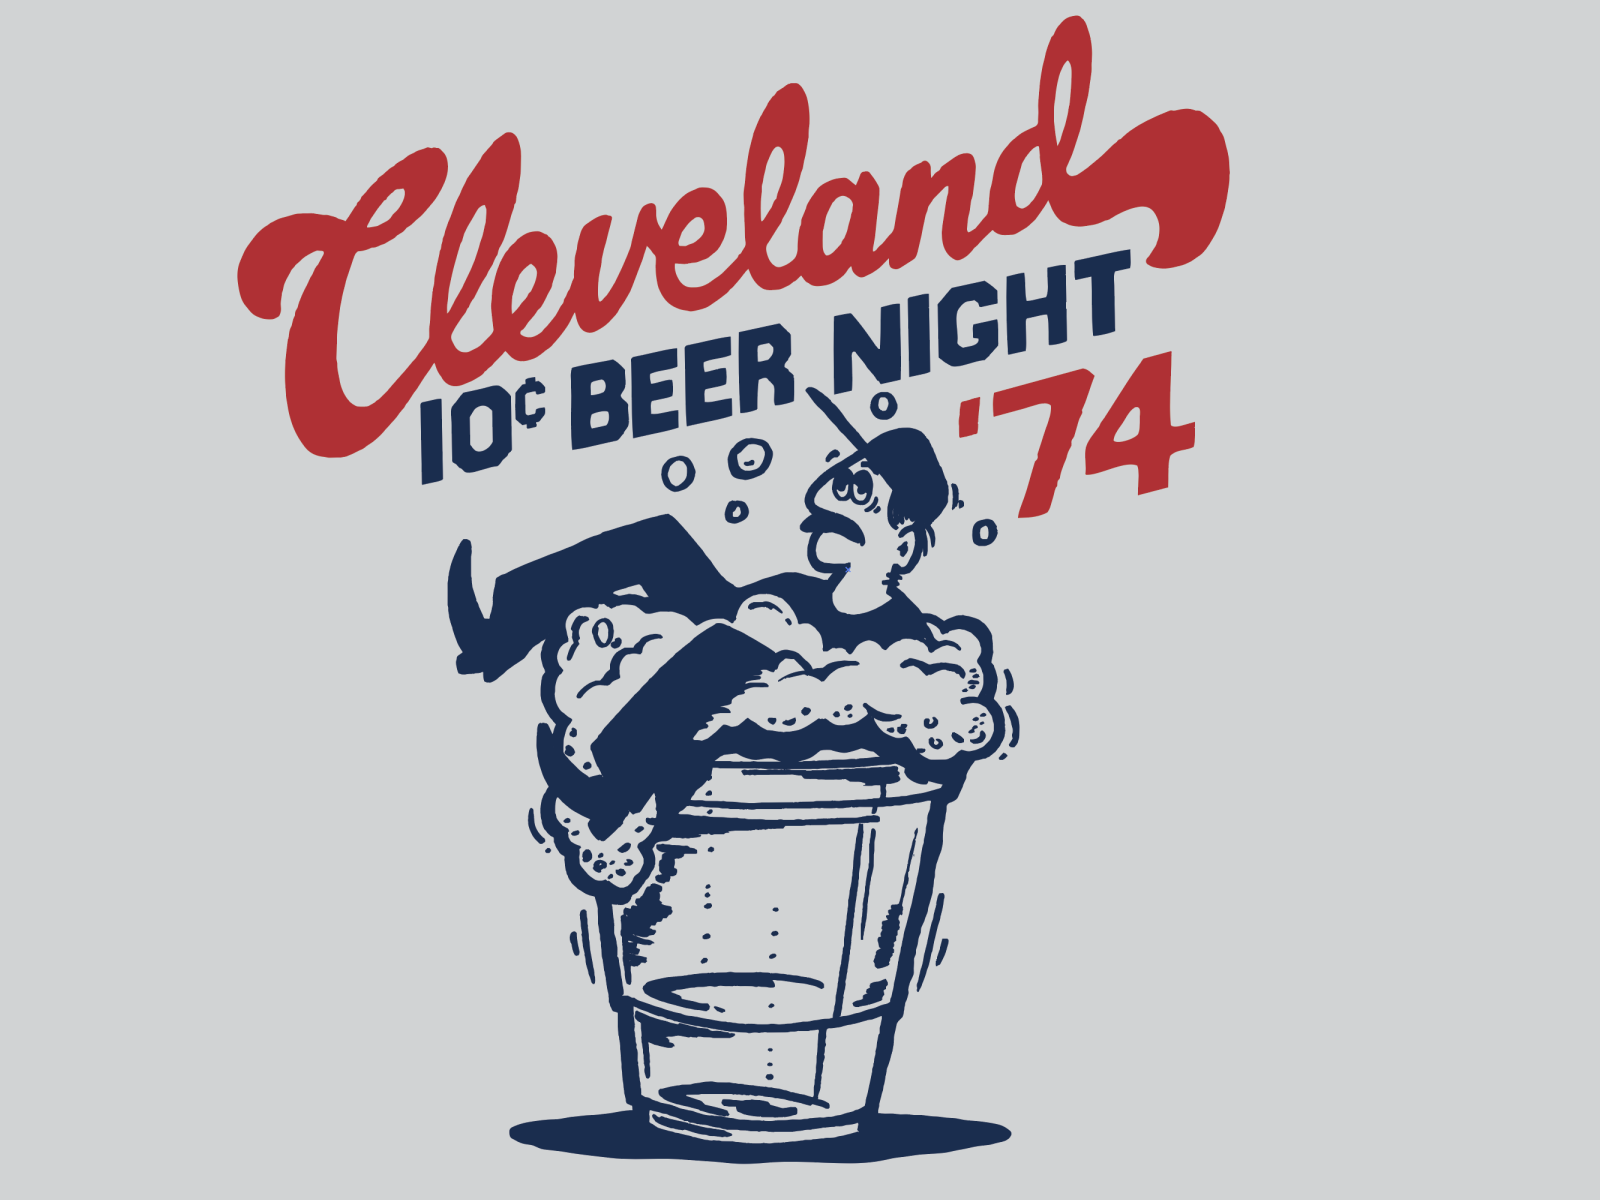 10 Cent Beer Night by Mark Mounts on Dribbble